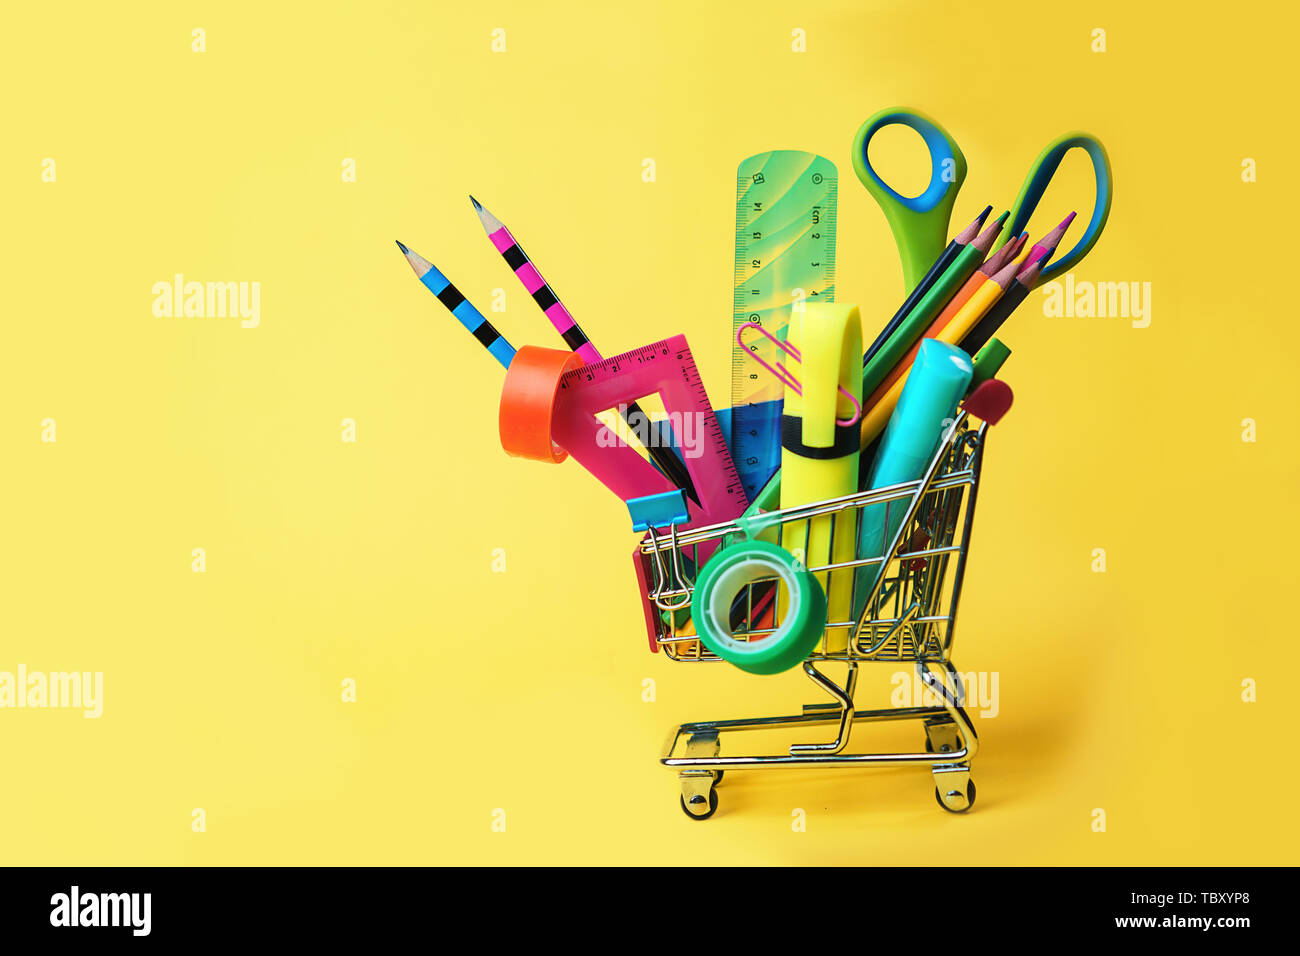 Back to school concept with shopping cart and colorful pencils, square ruler, scissors, clips, markers on pastel yellow backdrop. Stock Photo